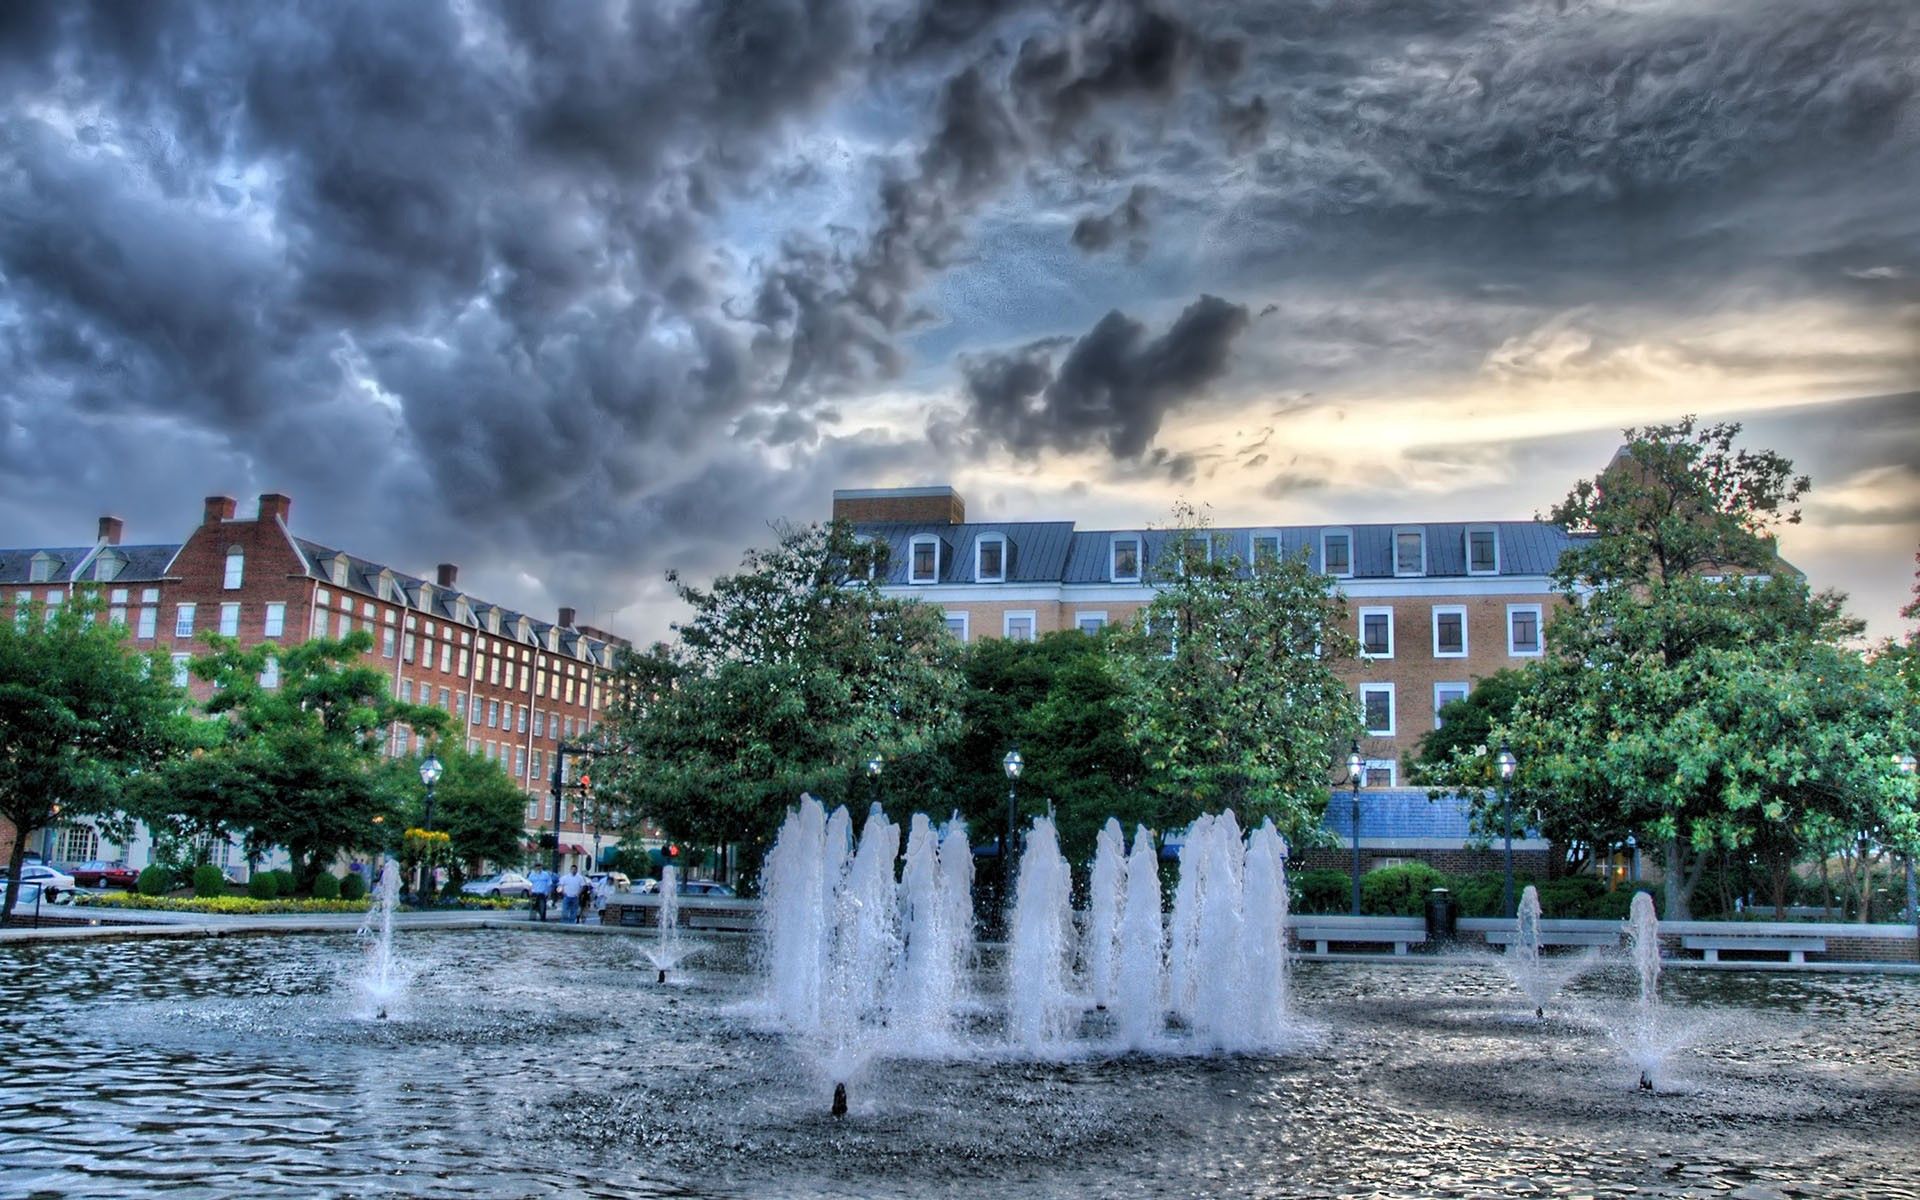 fountain, hdr, cities, water, trees, building Full HD